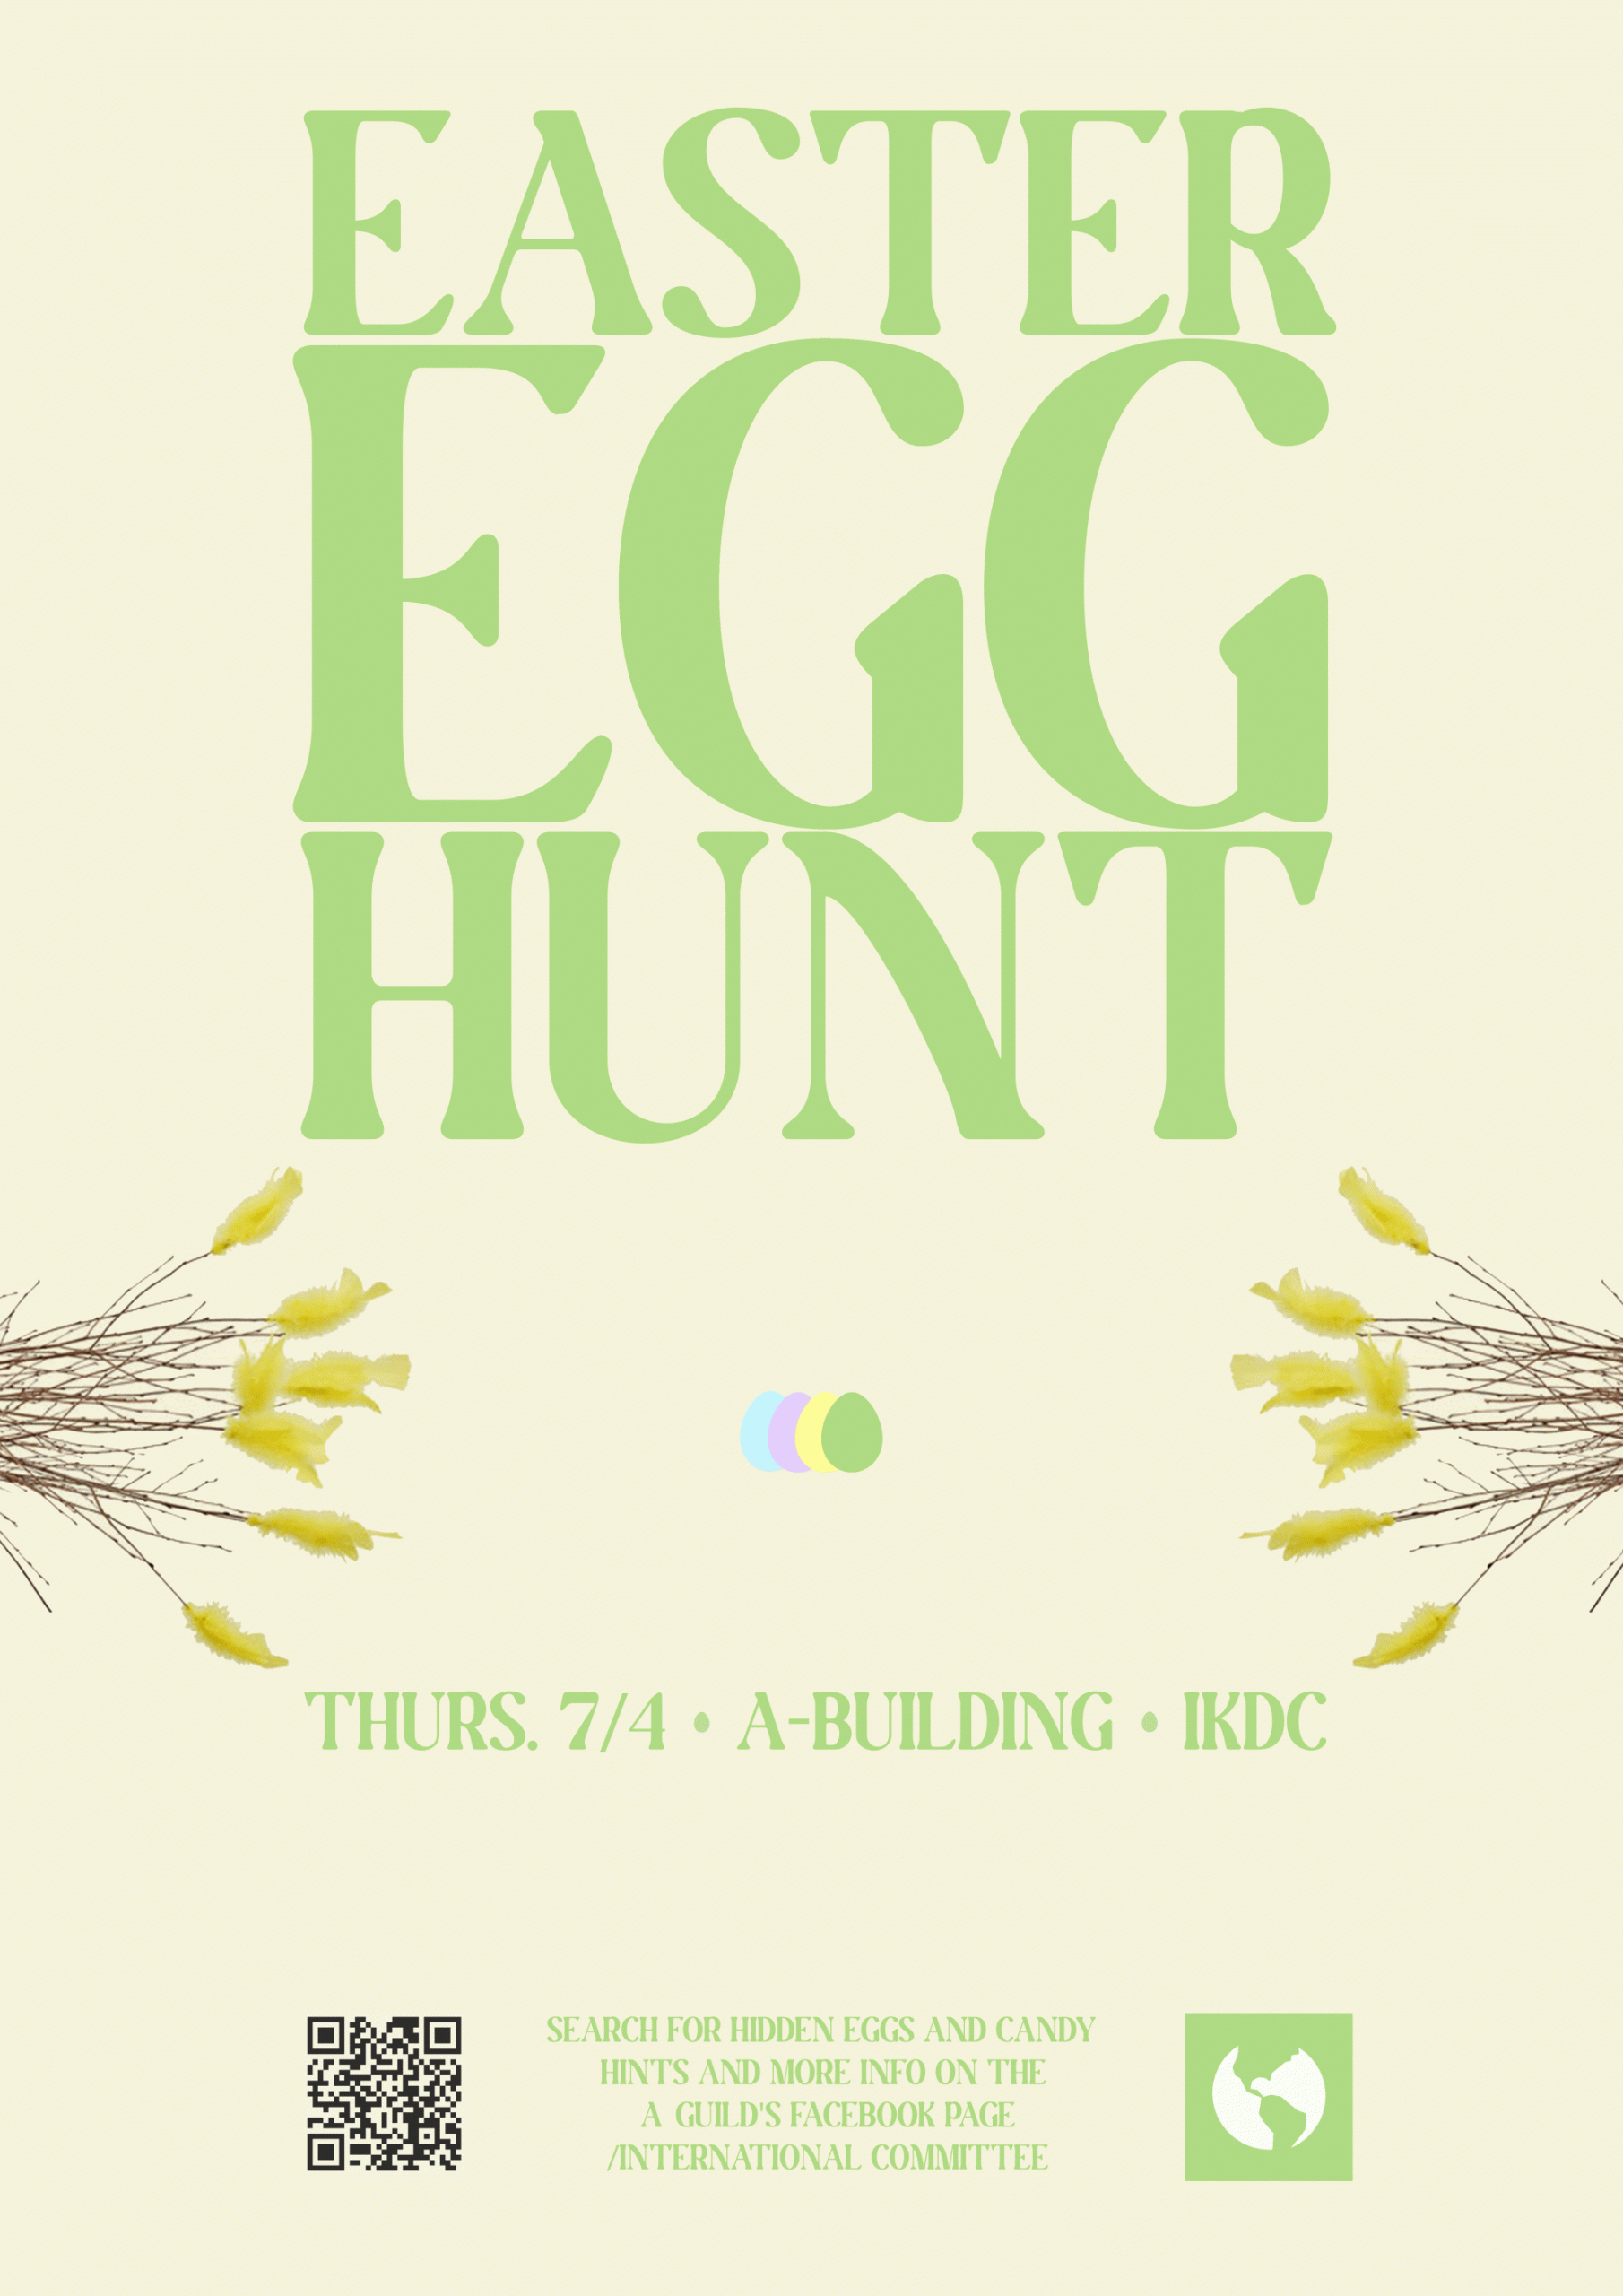 7/4 Easter Egg hunt with IntA